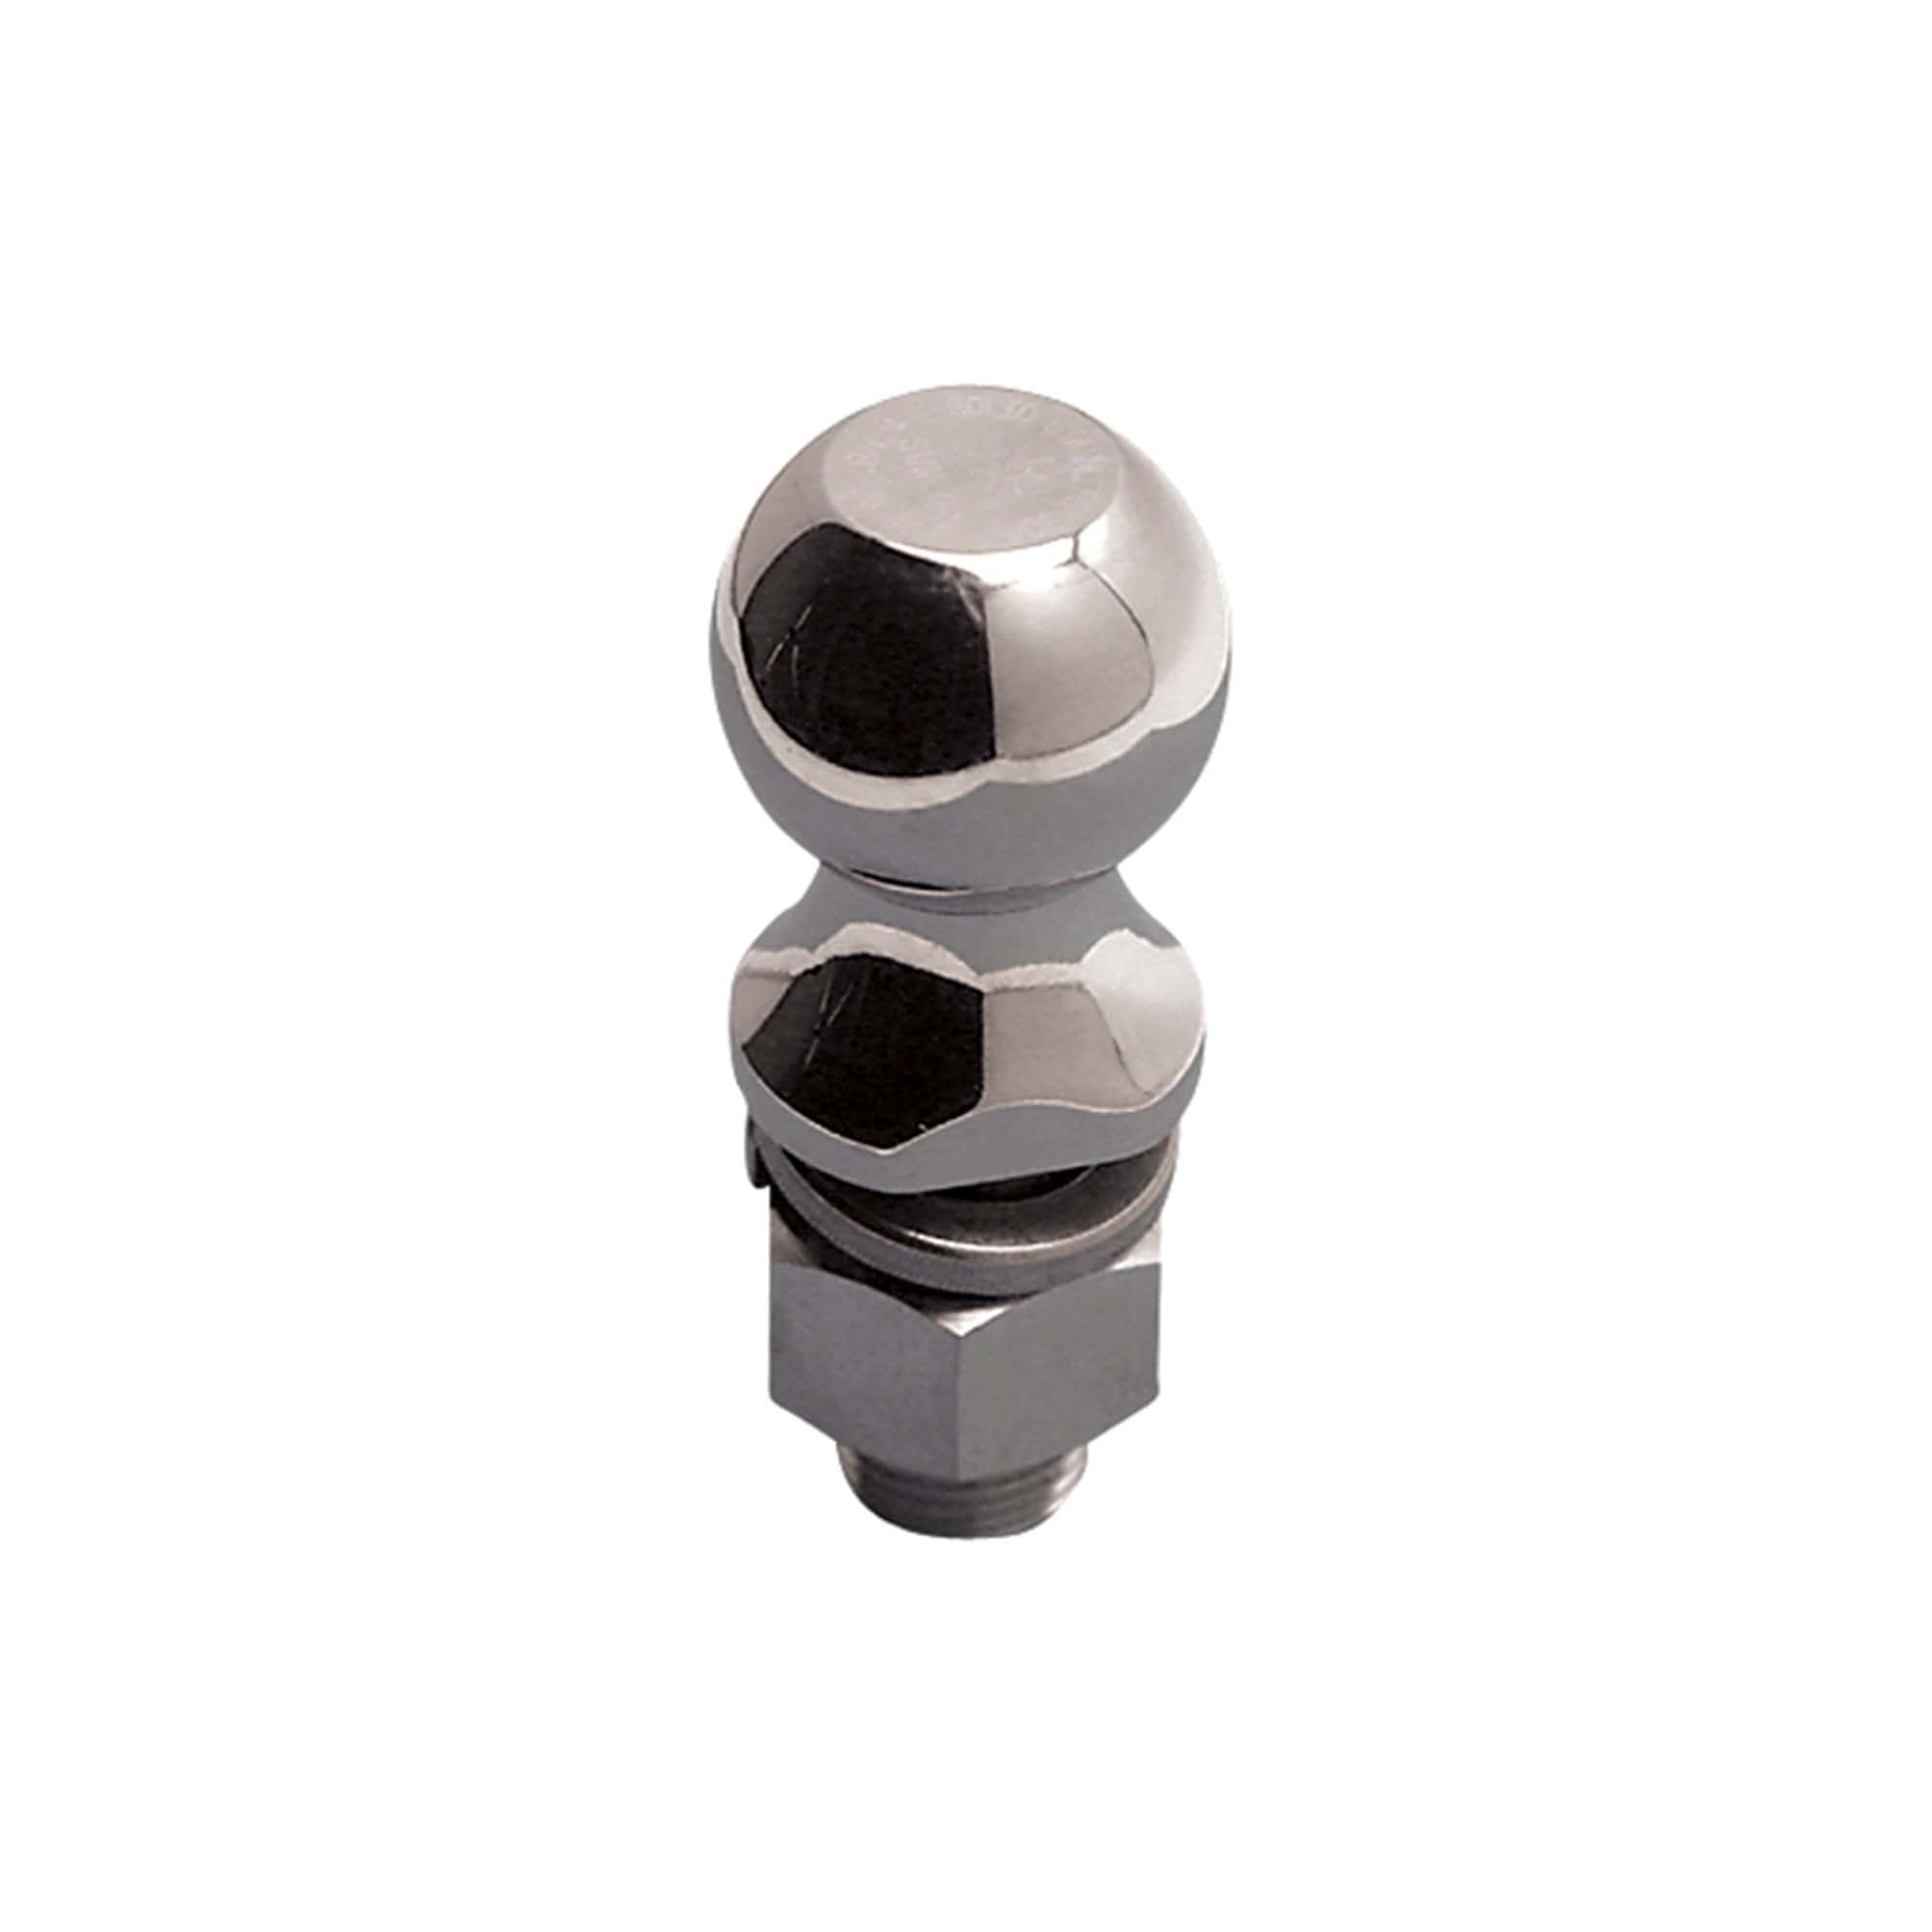 Suncor Stainless C0260-5020 Hitch Ball 2" X 3/4", 304 SS